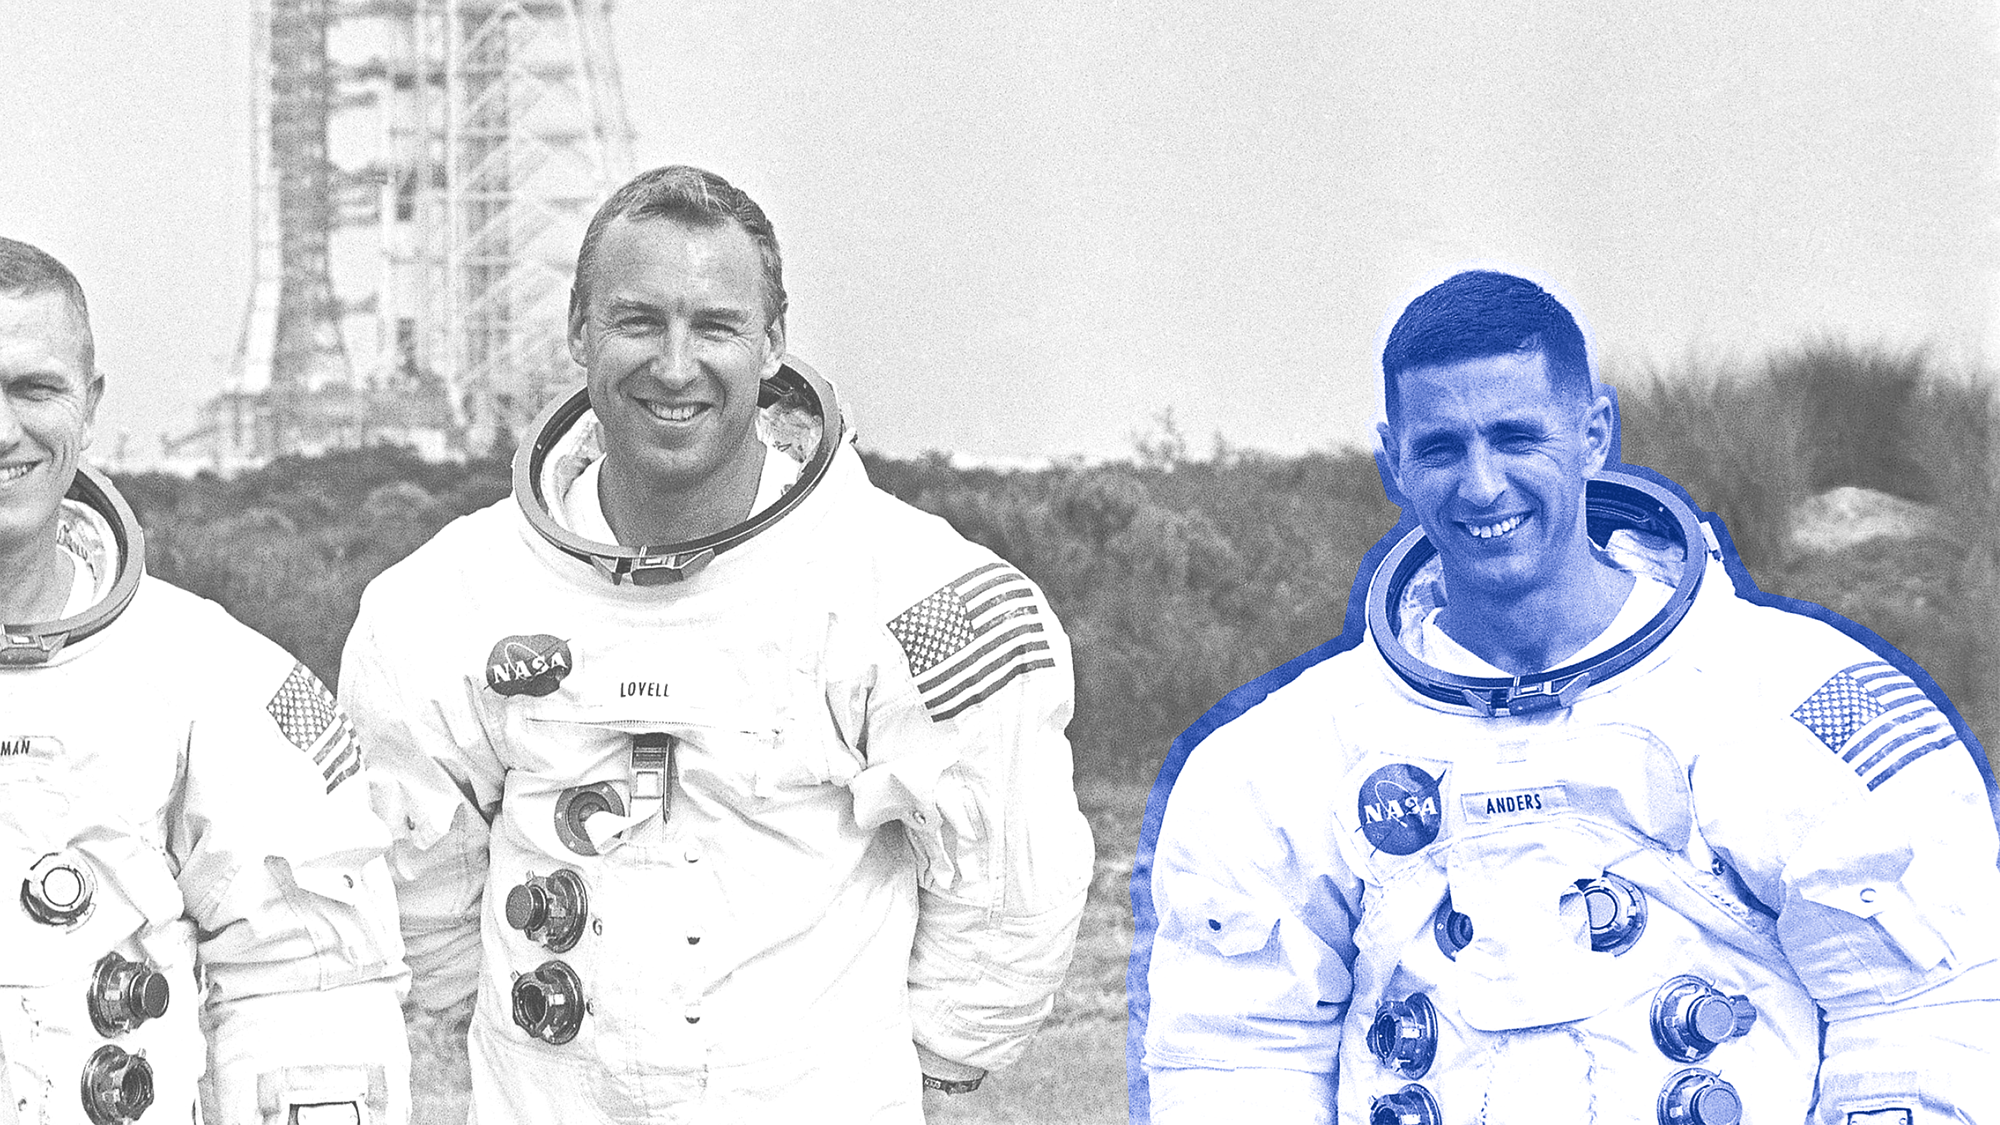 William "Bill" Anders from Apollo 8 astronaut to CEO of General Dynamics